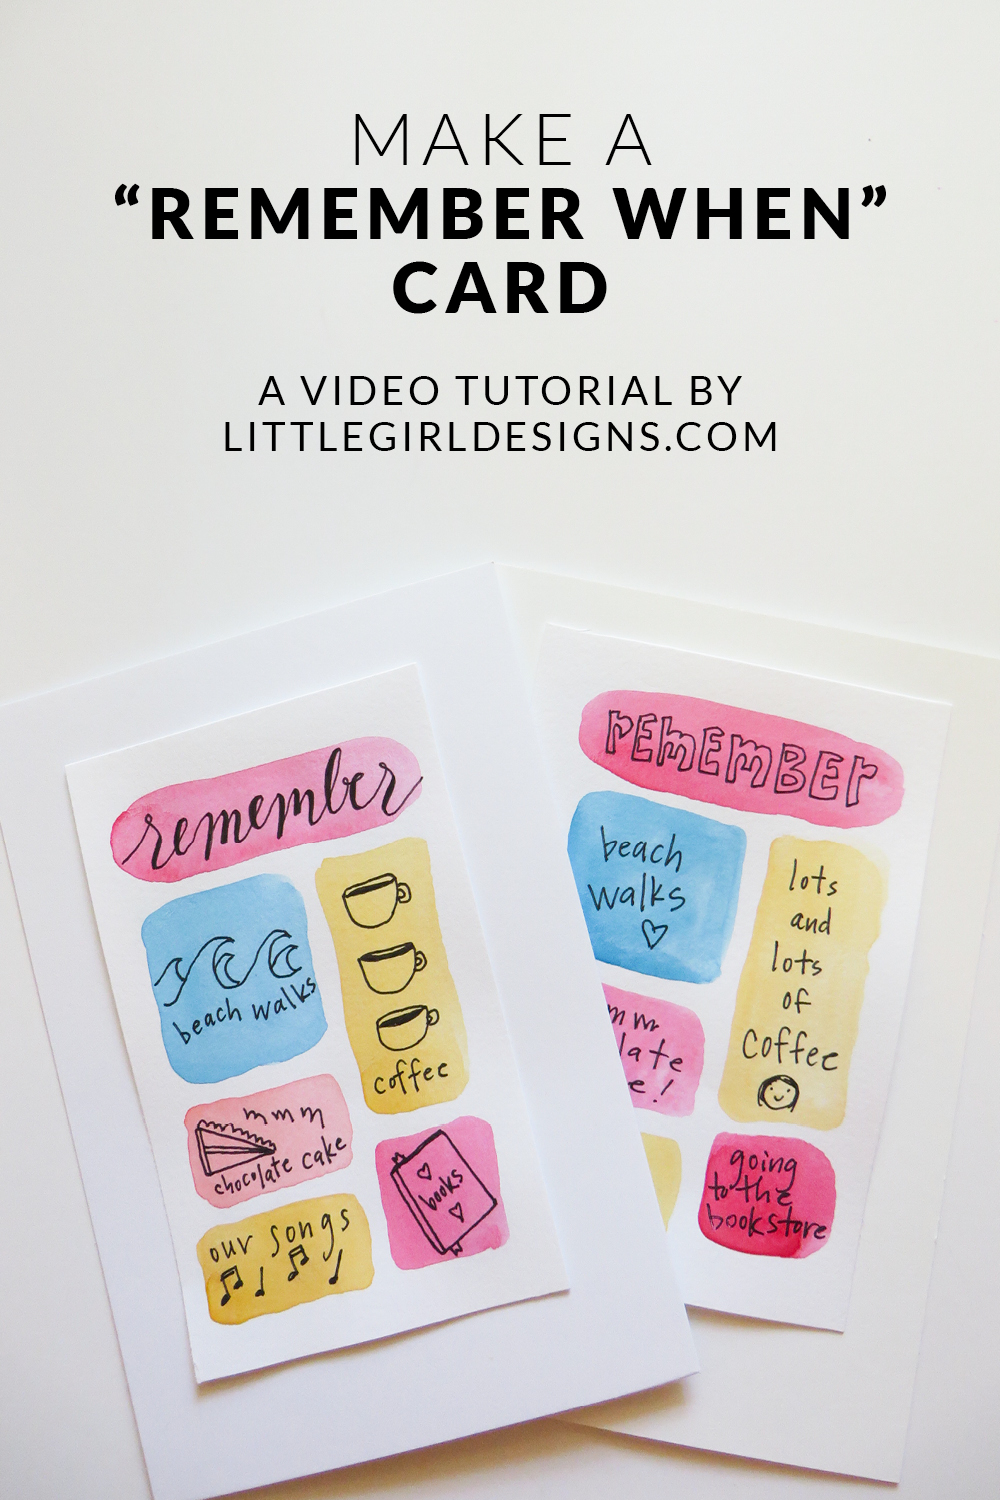 Watch as I create two simple "remember when" cards; you don't even have to consider yourself an artist to make these. And they make great gifts too!